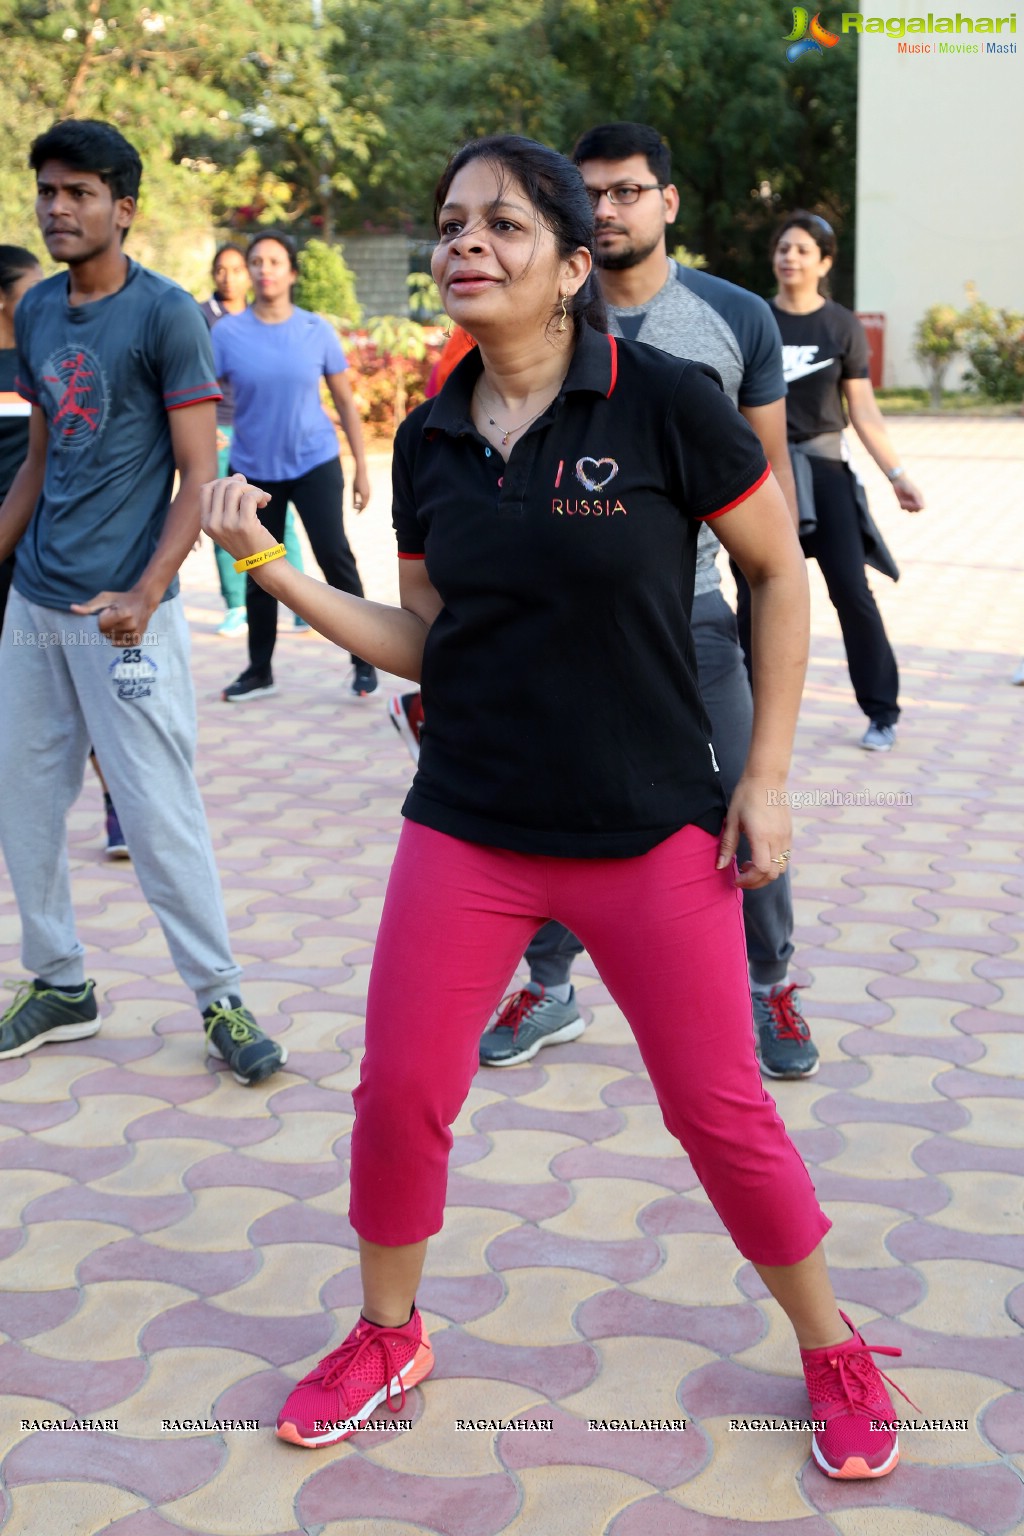 Dance Fitness Festival by Bobby Fitness Fusion & VENTZ at NITHM